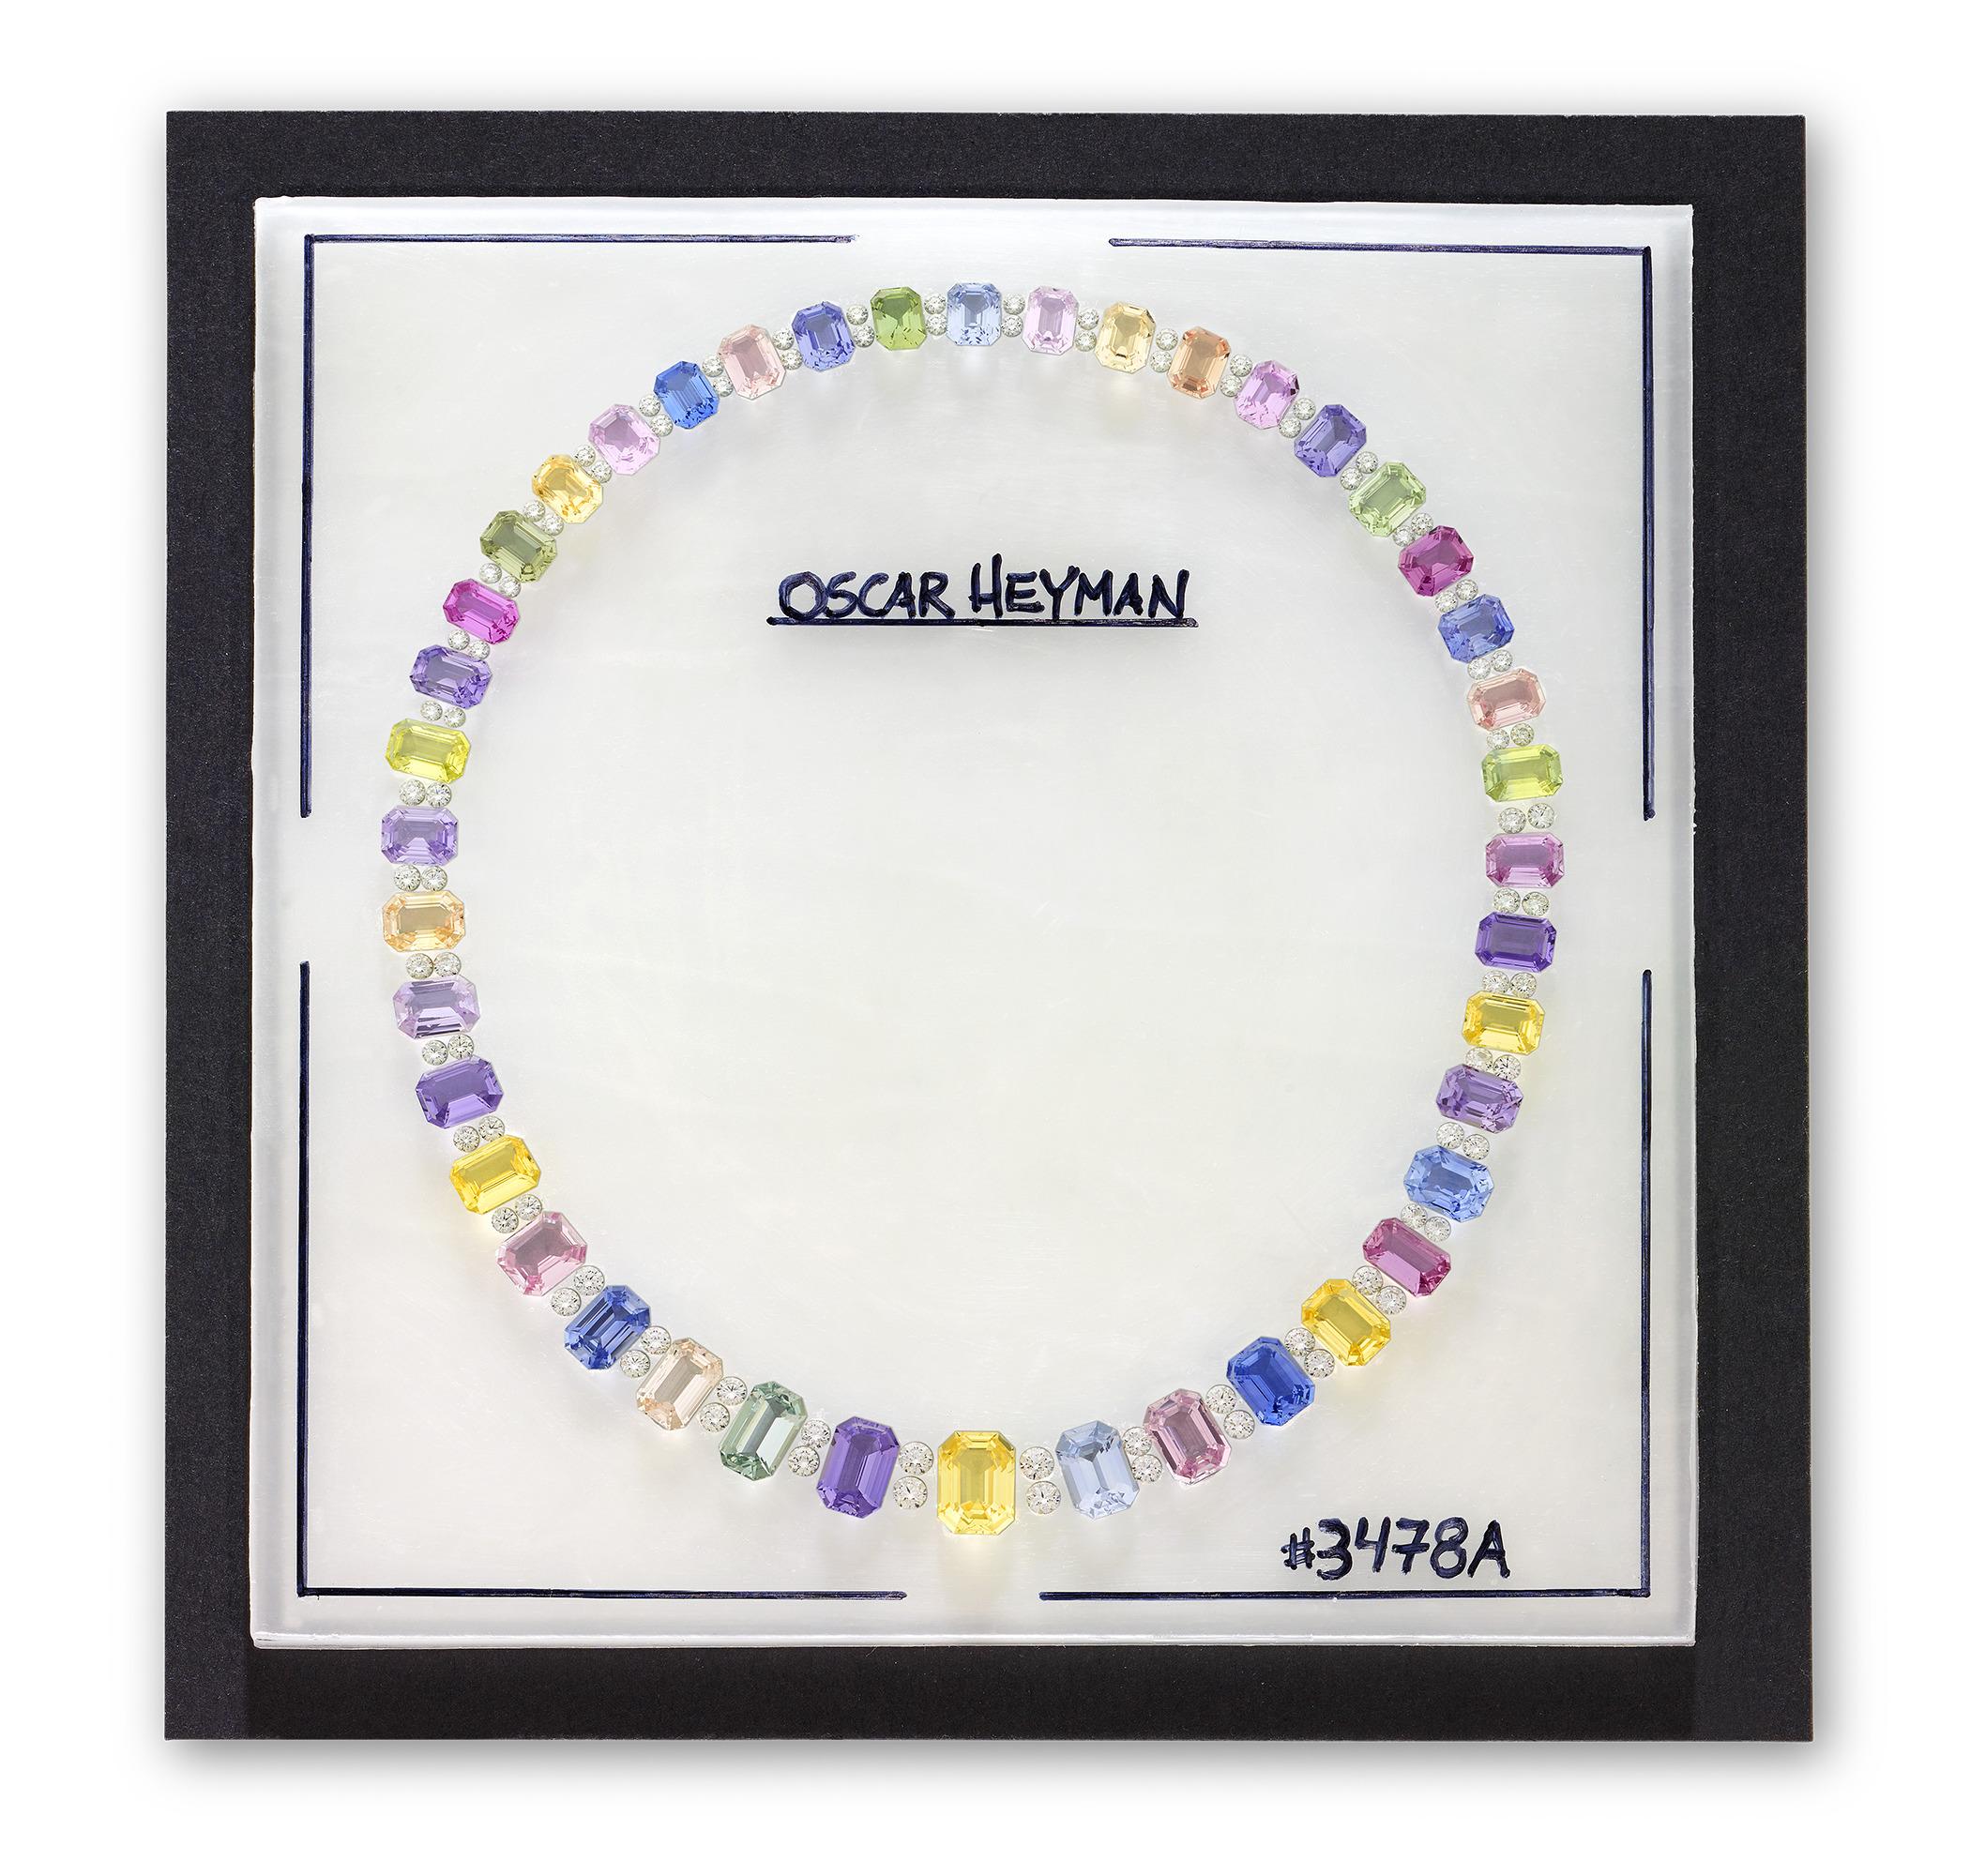 This stunning Oscar Heyman multicolor sapphire necklace layout affords a remarkable opportunity to personally collaborate with the legendary firm. The necklace can be set according to Heyman's original drawing that accompanies the piece, or it can